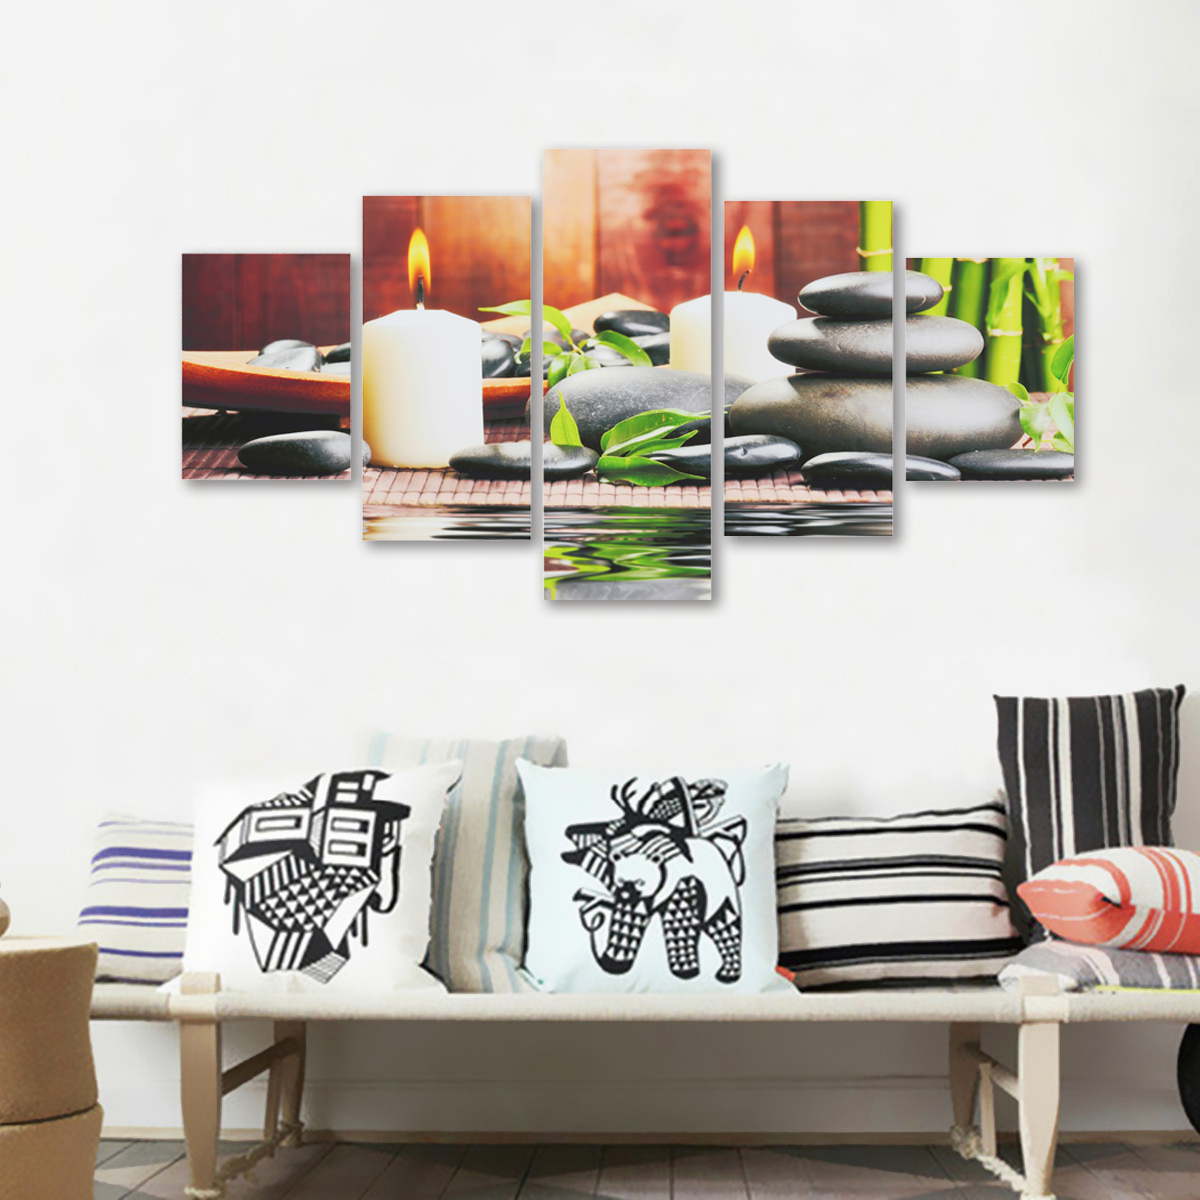 5Pcs-Canvas-Painting-Candle-Scenery-Picture-Wall-Decorative-Print-Art-Pictures-Frameless-Wall-Hangin-1803082-3